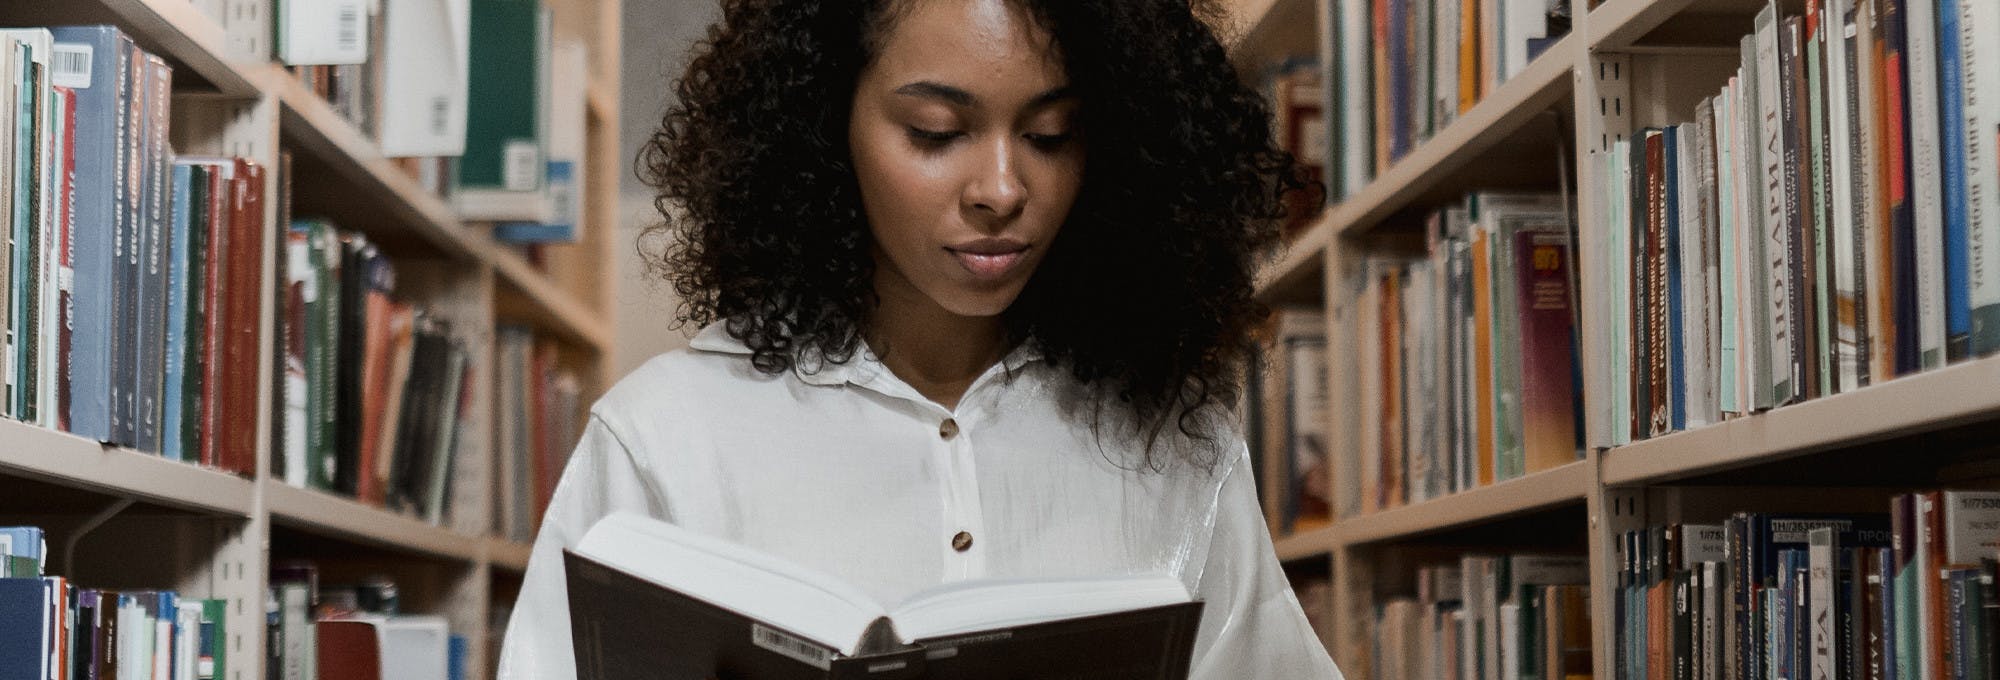 Black woman reading a literature book in a library aisle